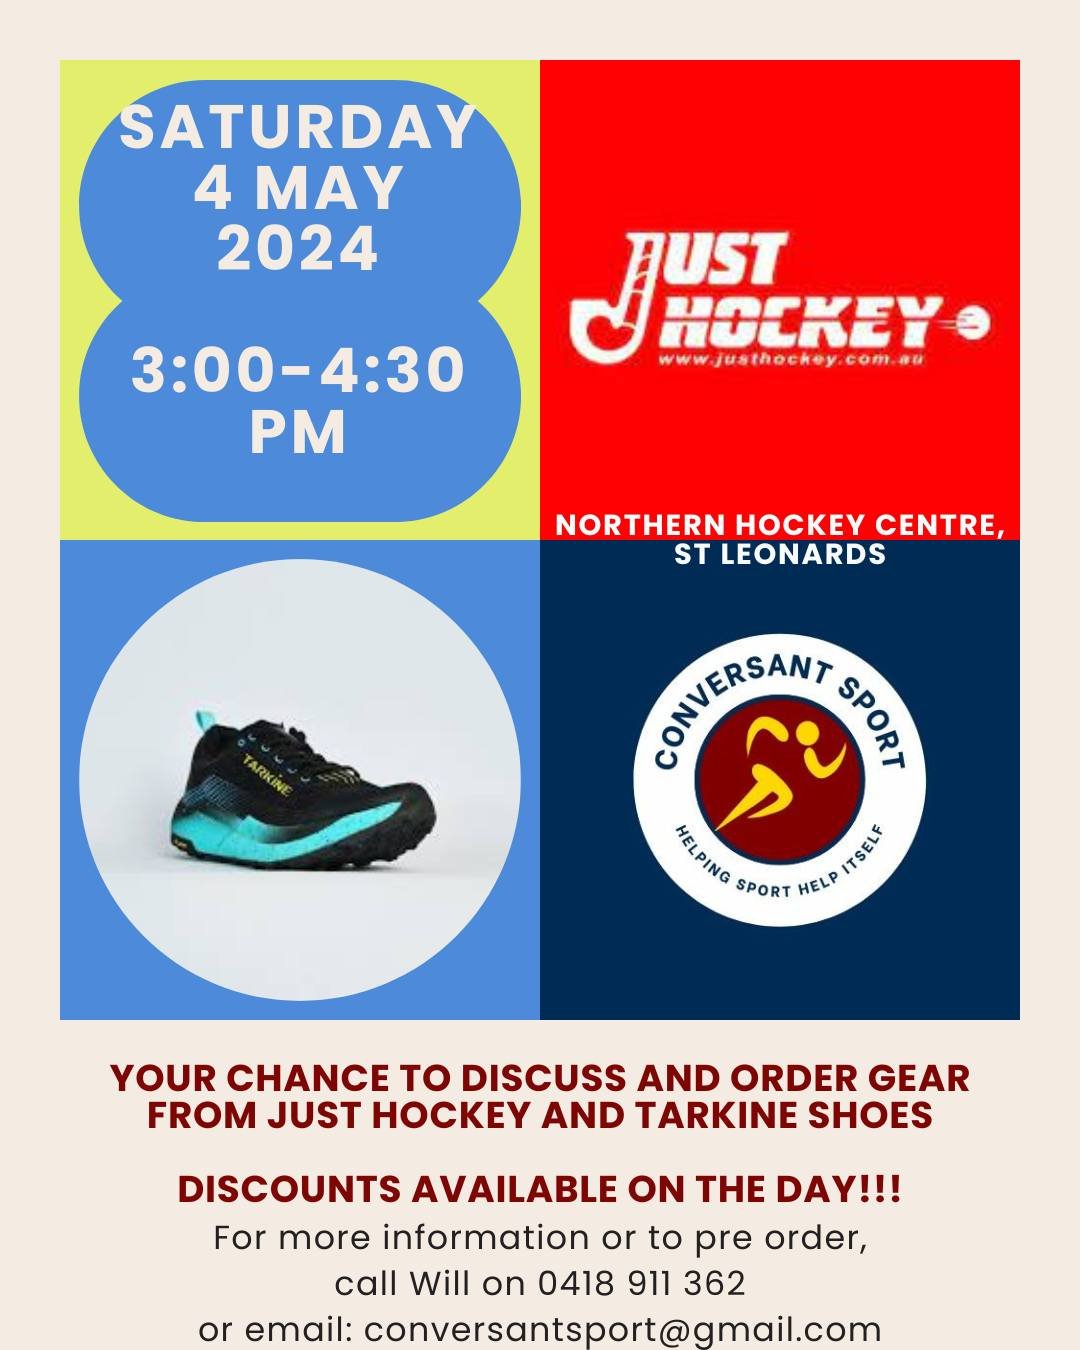 TODAY!!!

We can't wait to see as many people as possible at the Northern Hockey Centre, St Leonards to discuss your hockey equipment options.

Special prices available!

Pop into the bar area from 3:00pm, say g'day to Will and Zara and see what they